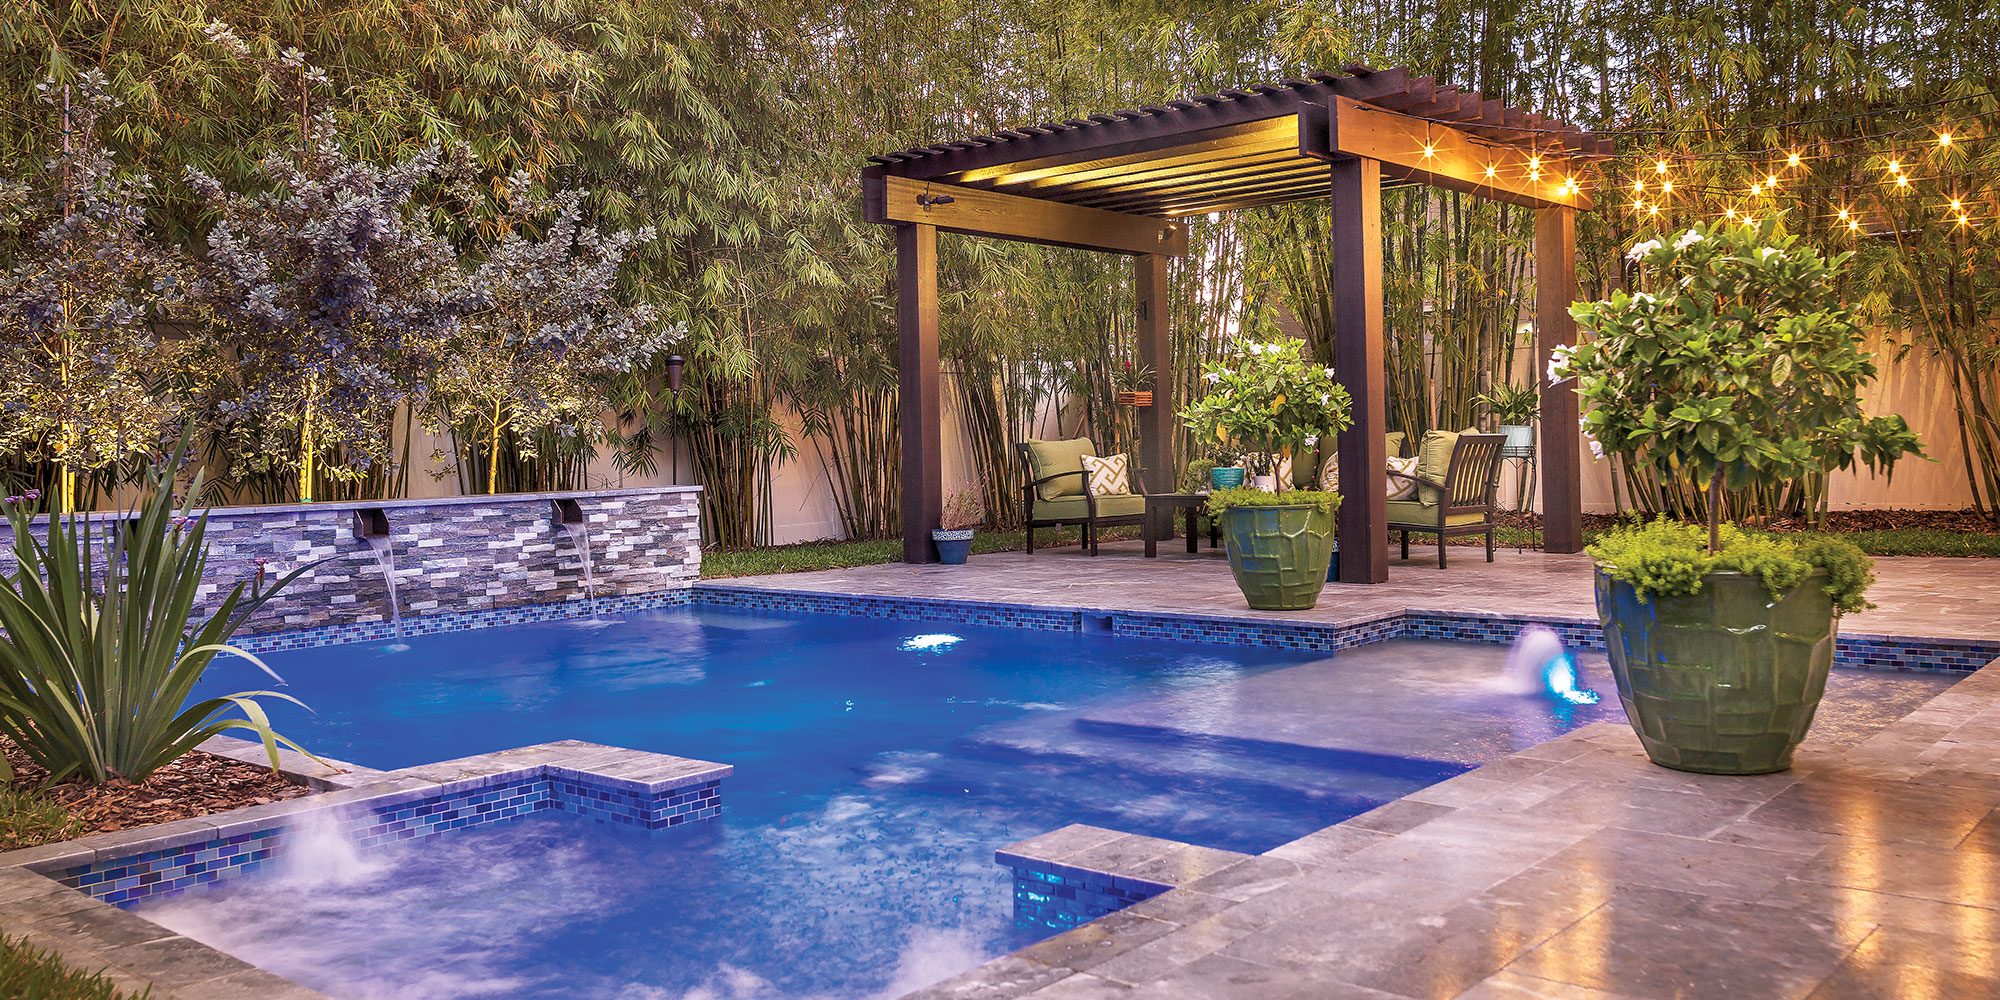 3 Beautiful Outdoor Spaces - Tampa Magazine